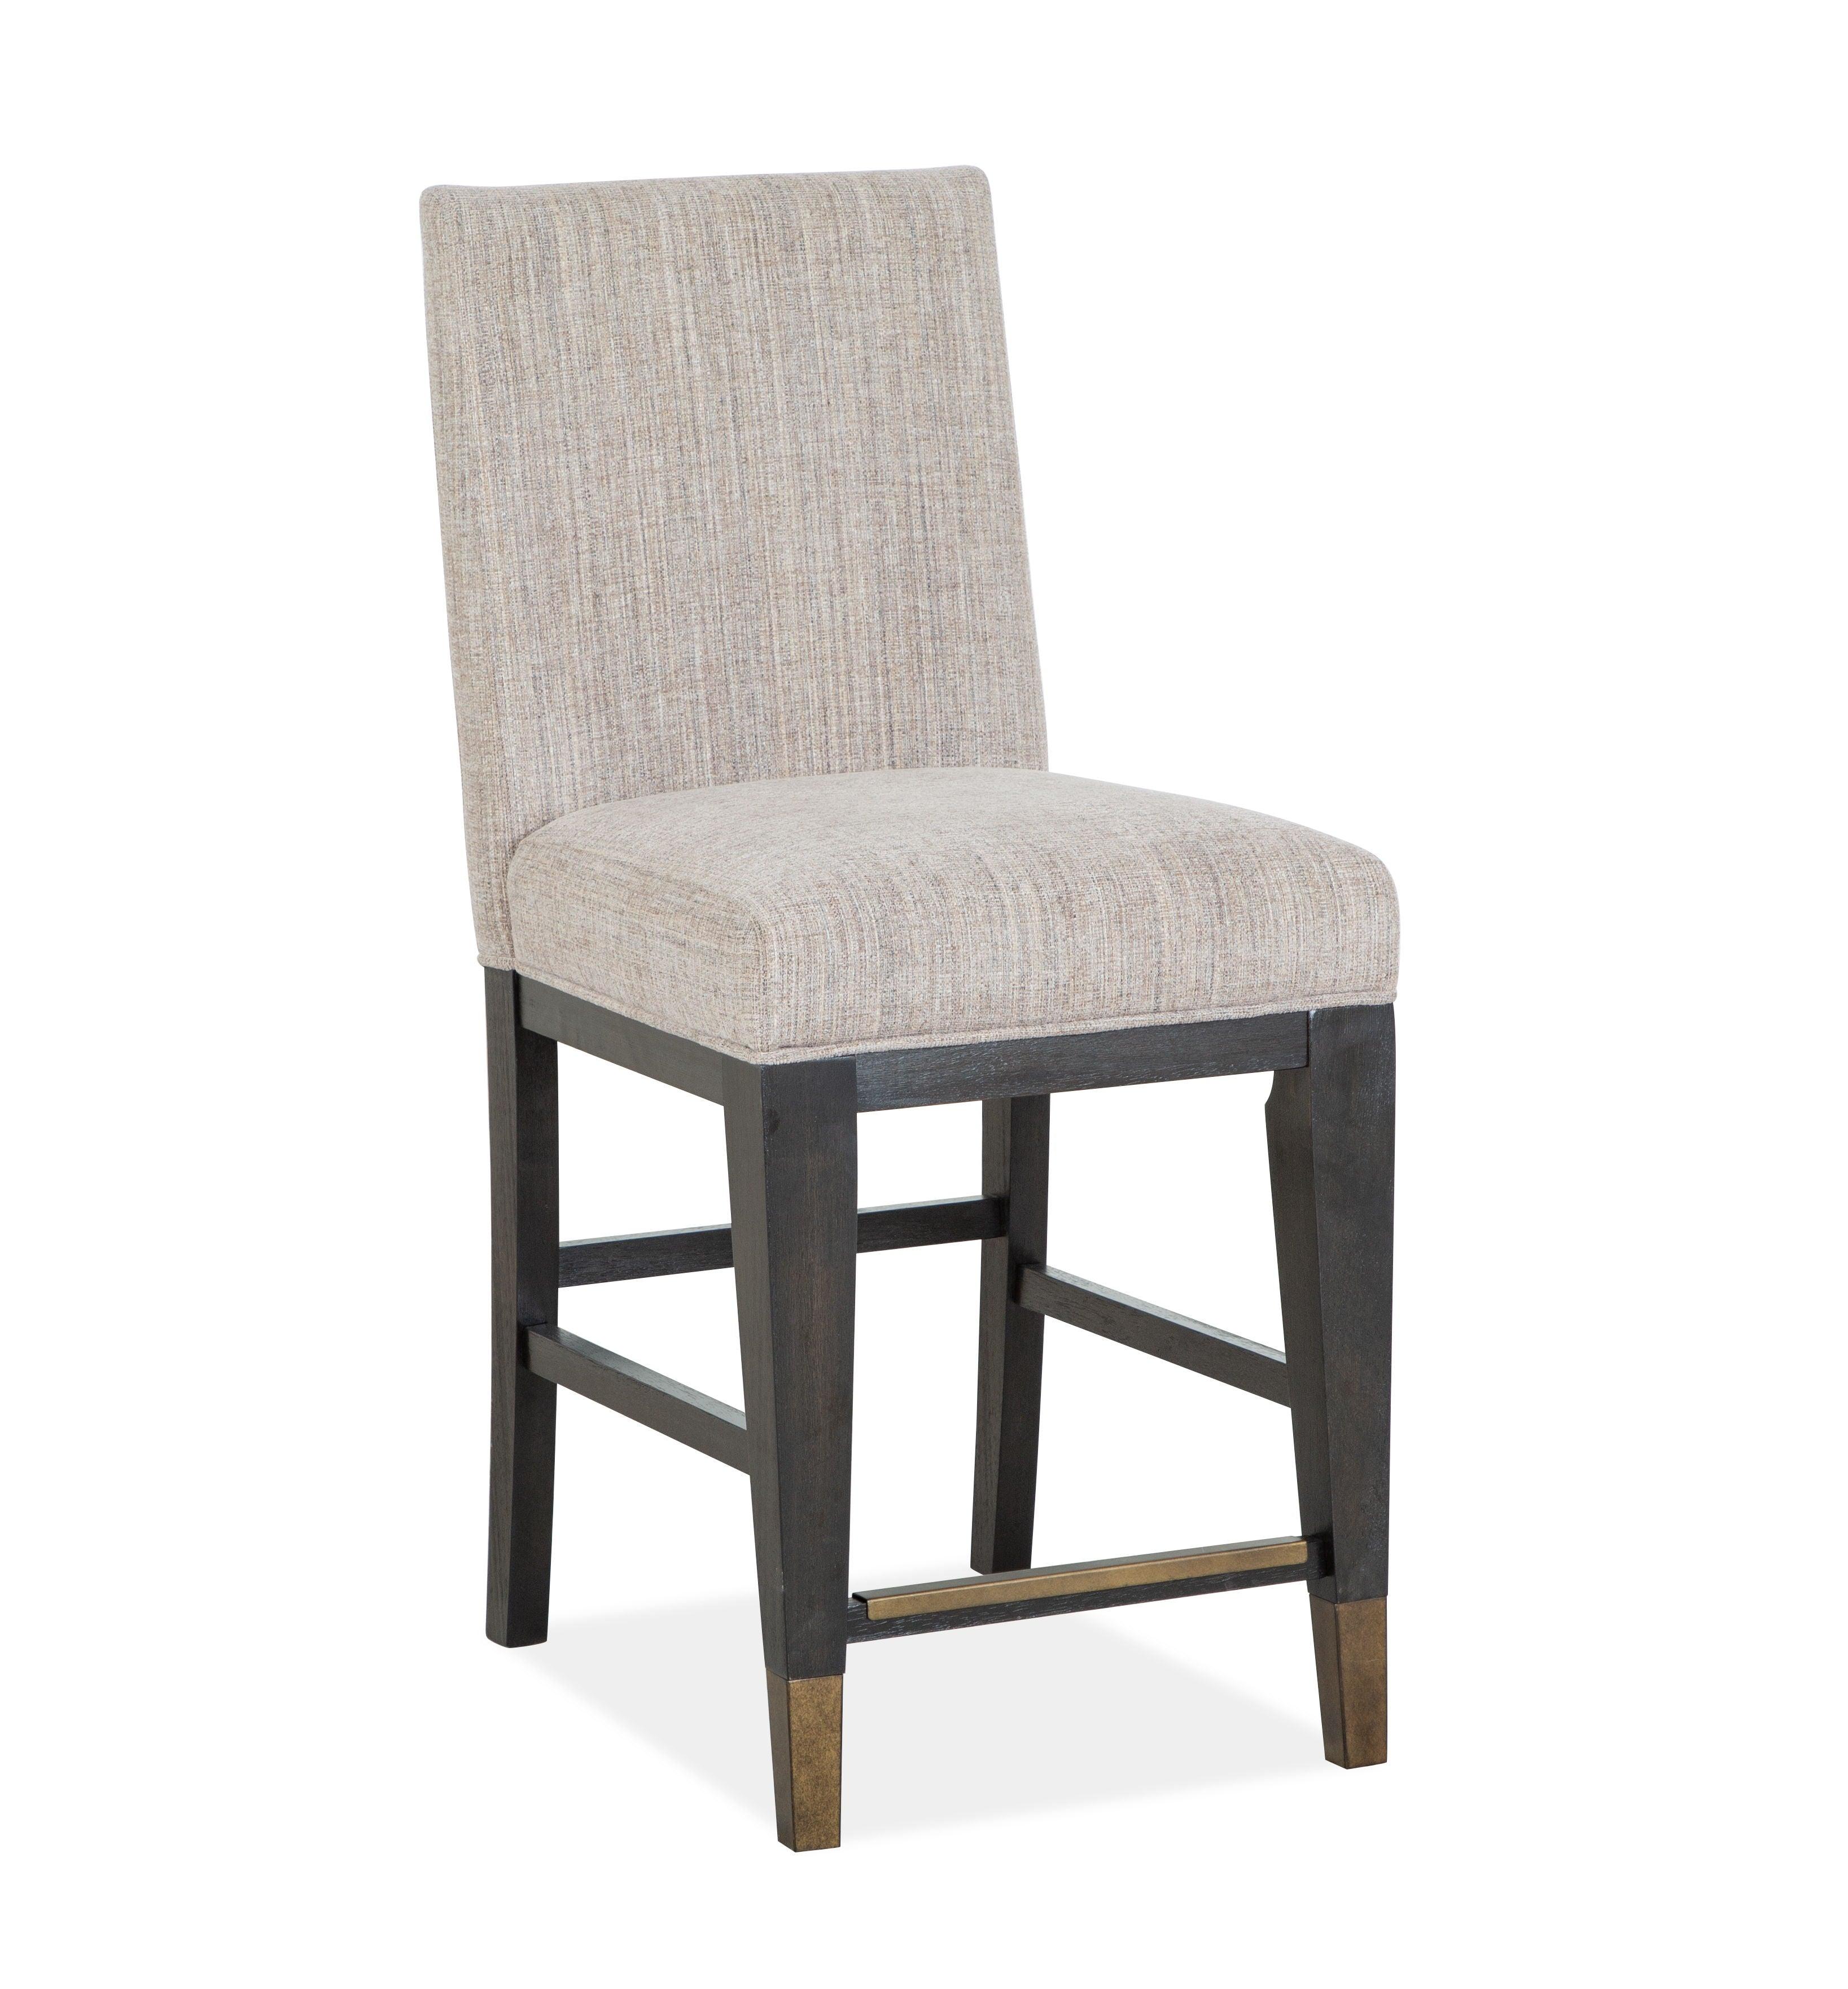 Magnussen Furniture - Ryker - Counter Chair With Upholstered Seat And Back (Set of 2) - Nocturn Black - 5th Avenue Furniture